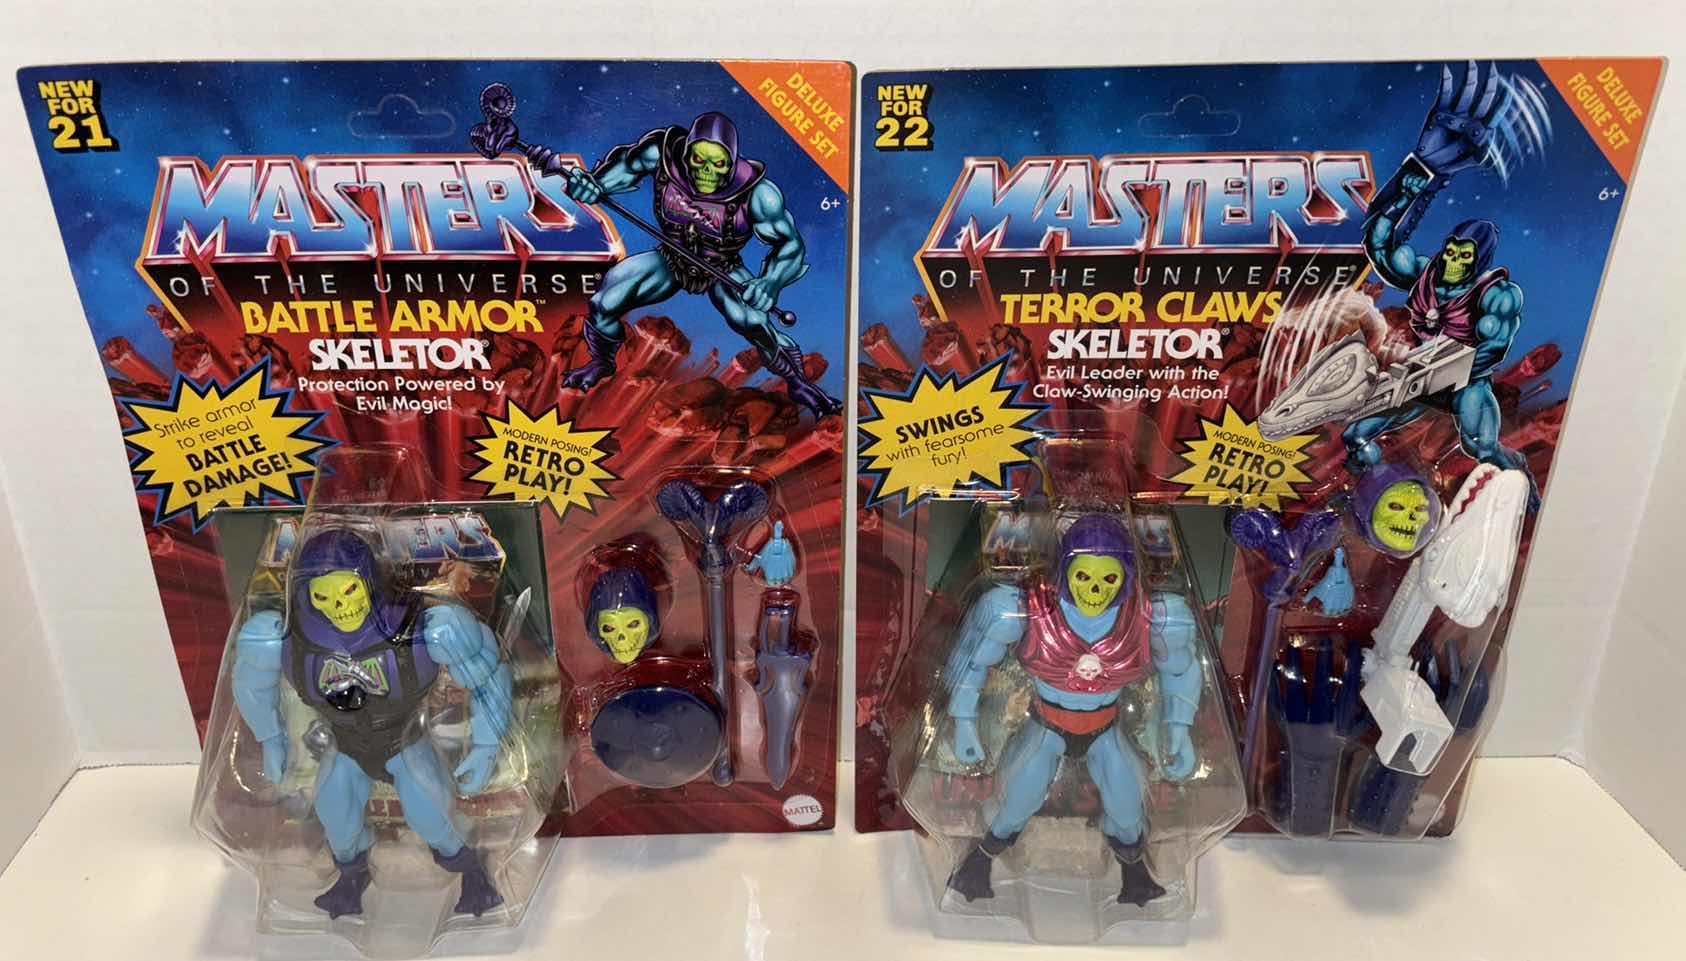 Photo 1 of NEW MATTEL MASTERS OF THE UNIVERSE 2-PACK “BATTLE ARMOR SKELETOR” & “TERROR CLAWS SKELETOR” ACTION FIGURES & ACCESSORIES